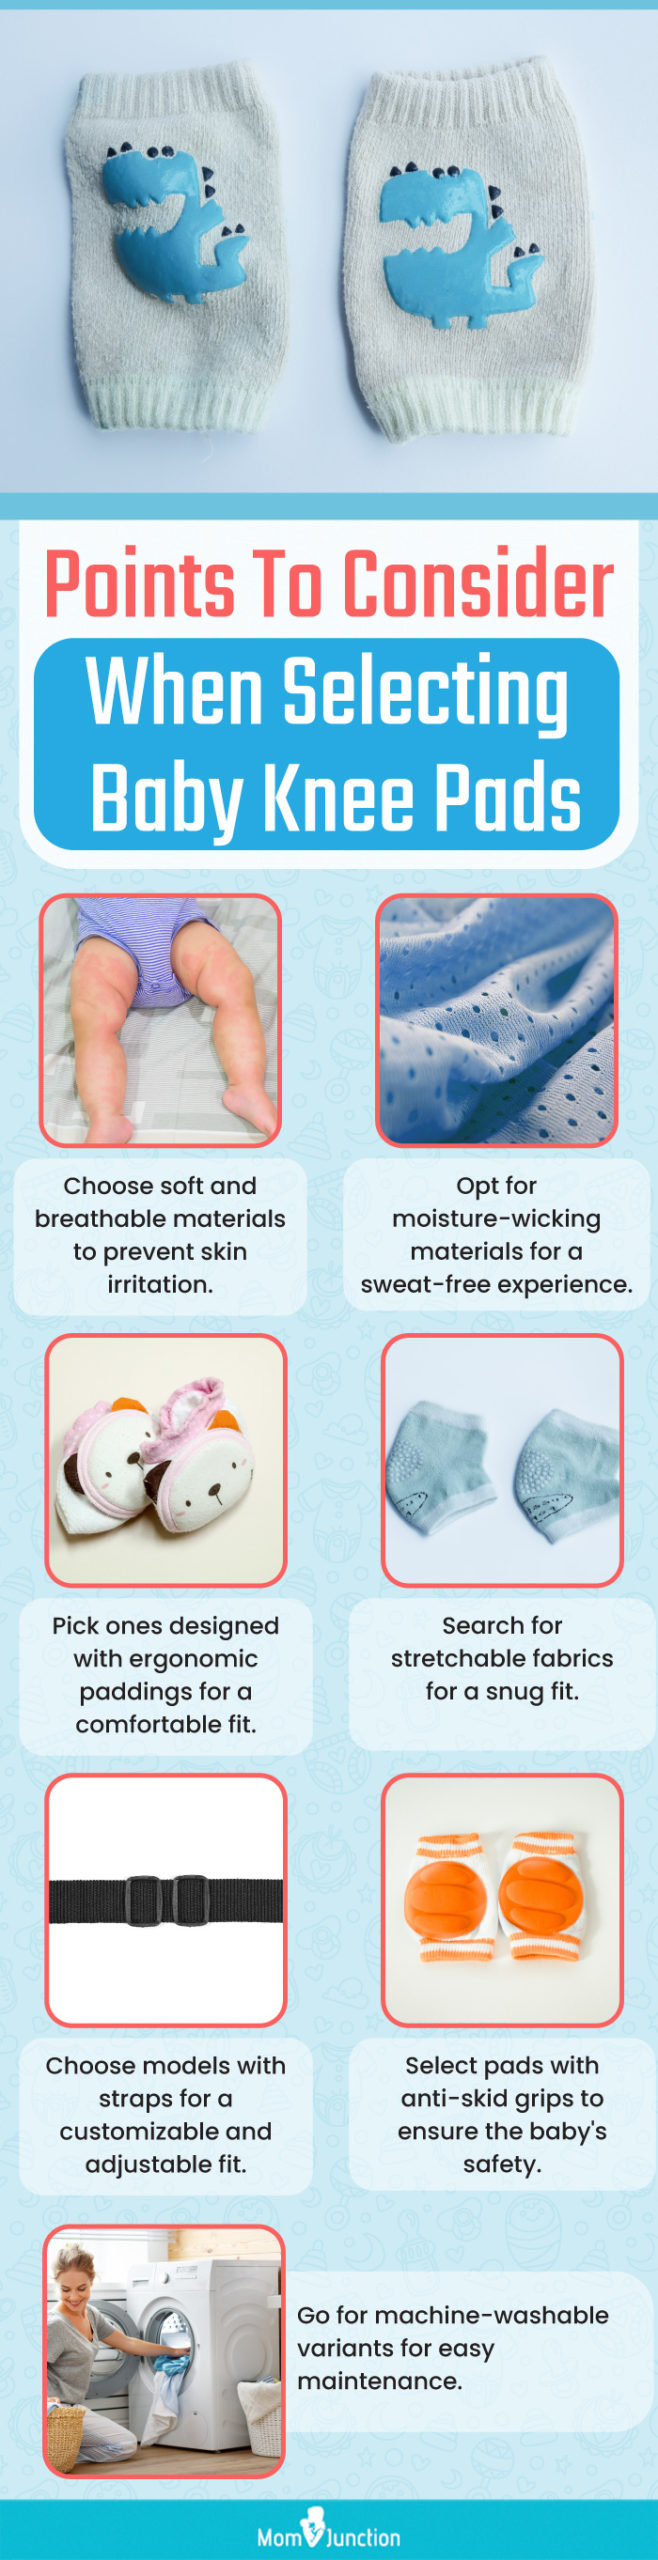 Points To Consider When Selecting Baby Knee Pads (infographic)